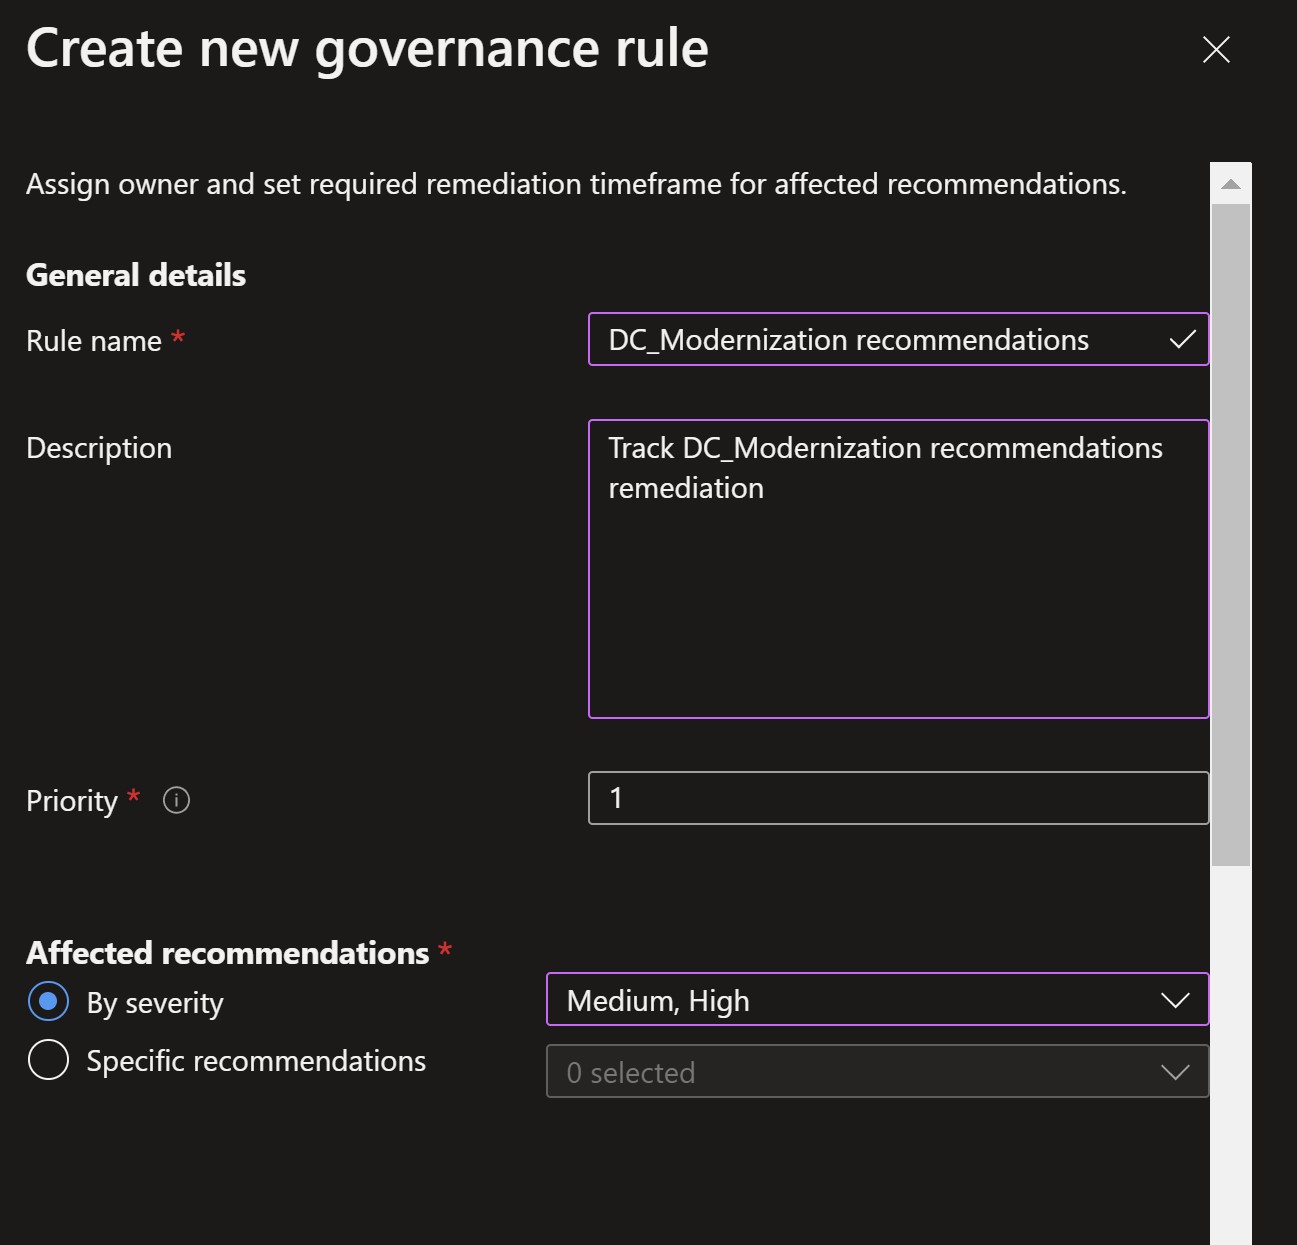 Screenshot showing the creation of a new governance rule